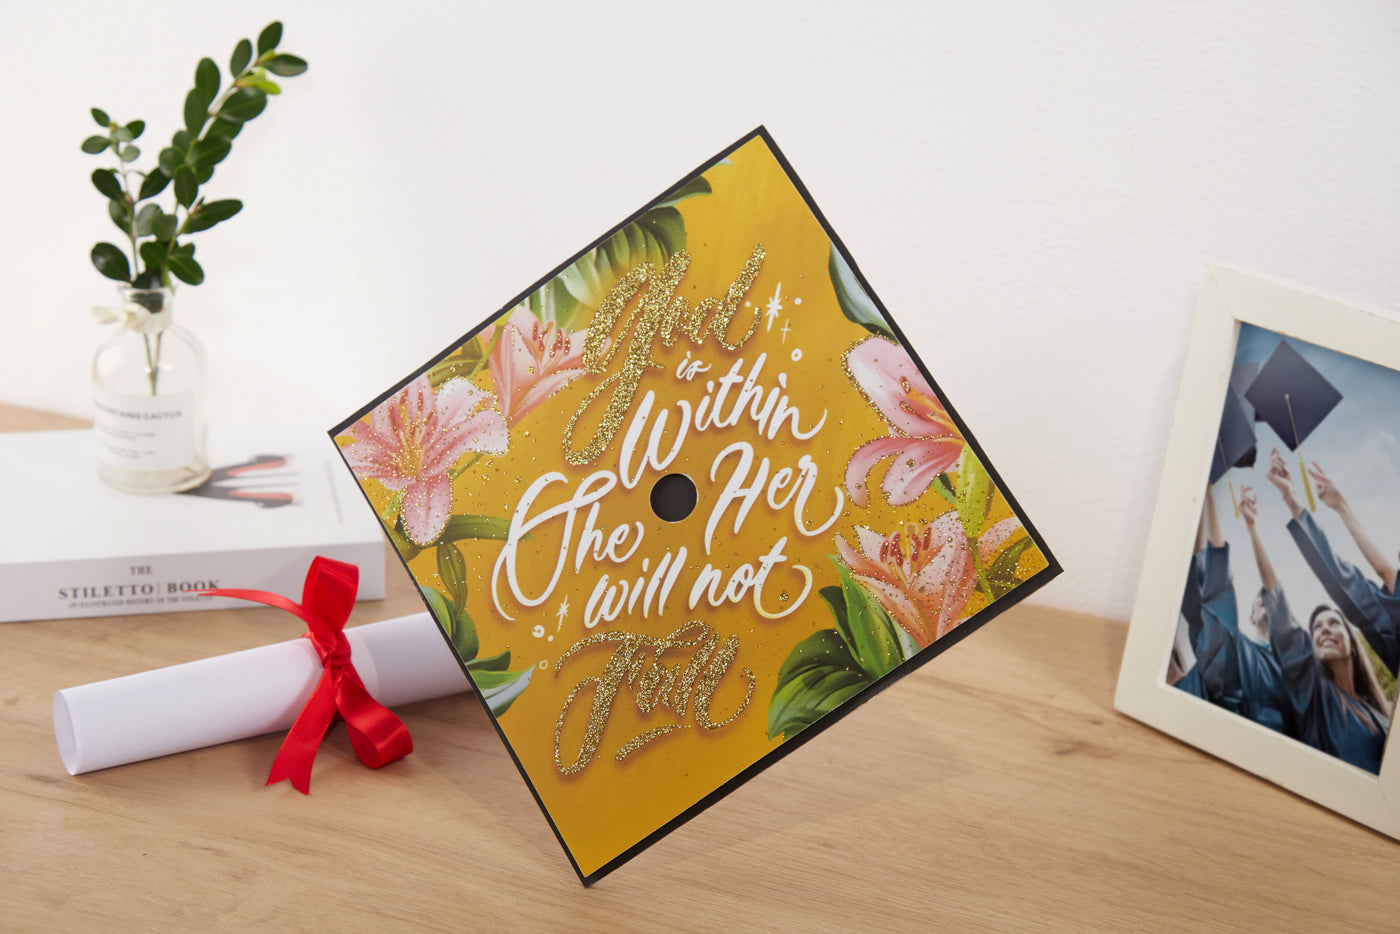 Graduation cap topper art print, God is within her she will not fall